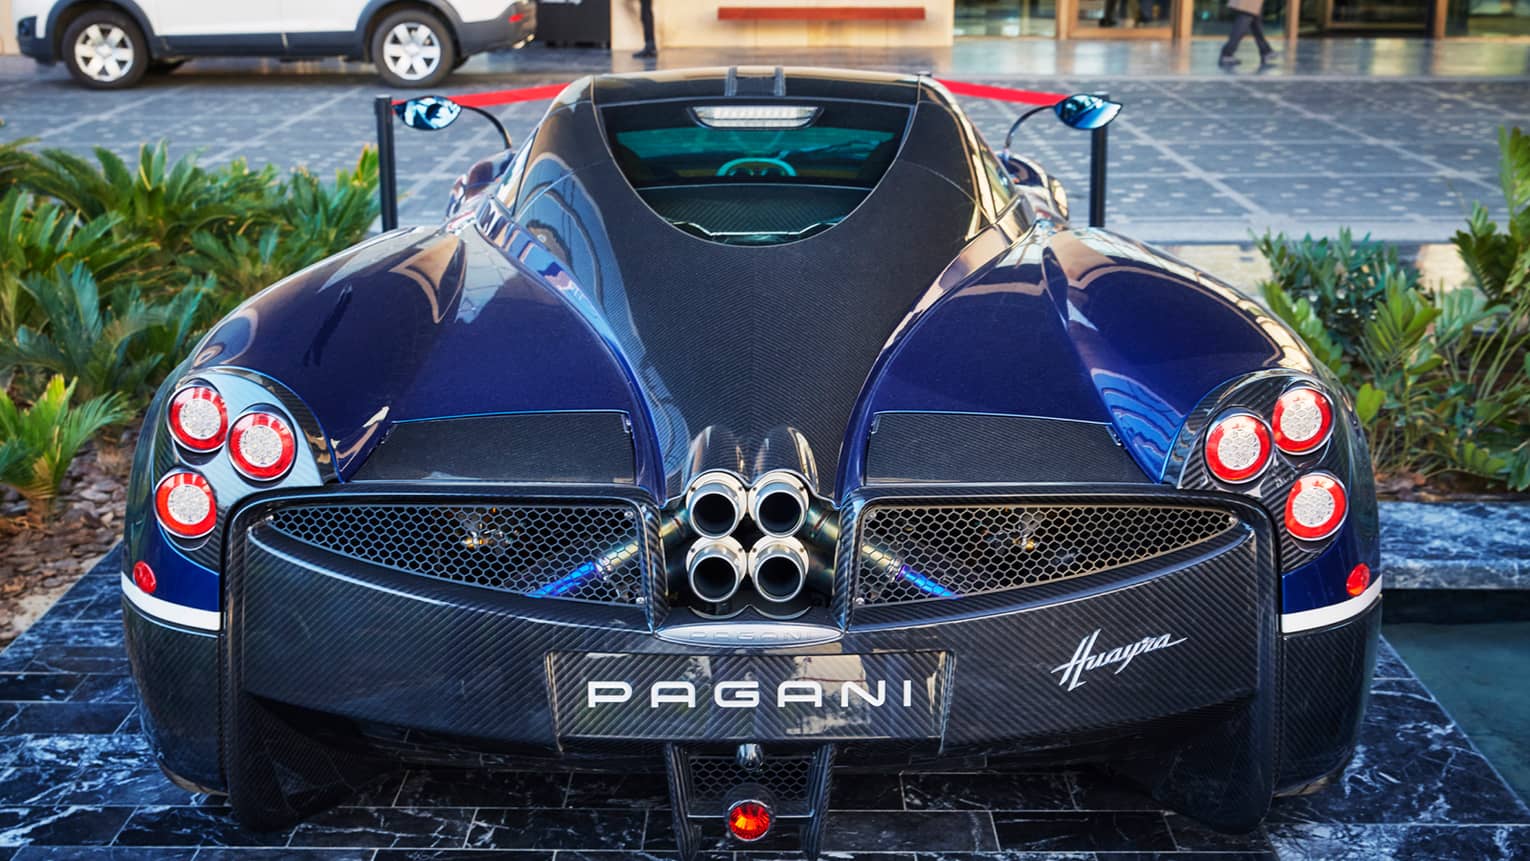 Luxury modern Pagani car parked on marble driveway